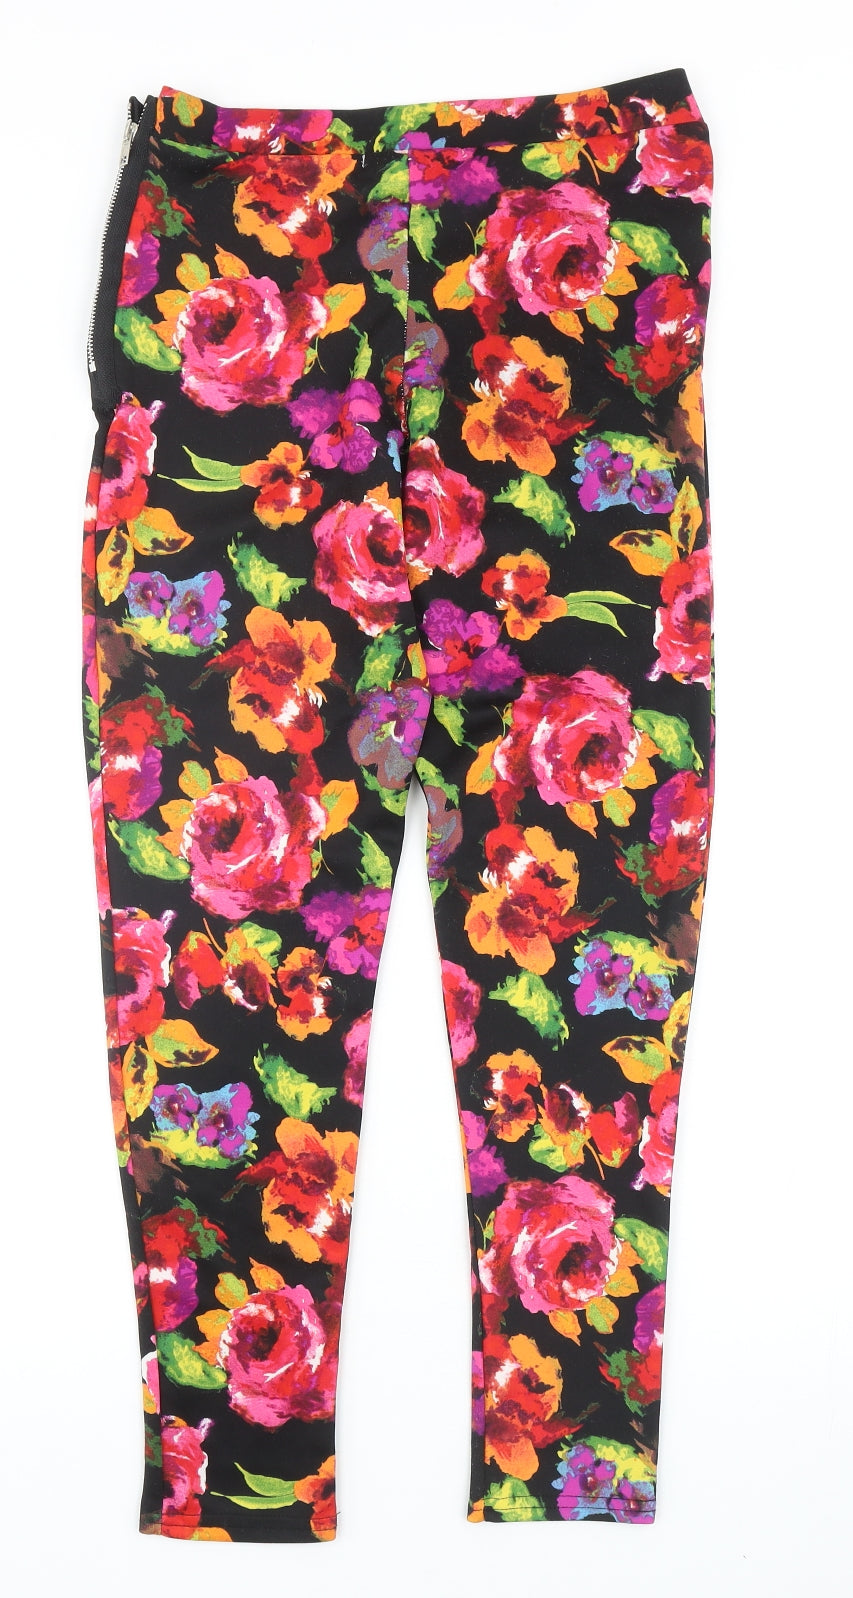 Boohoo Womens Multicoloured Floral Polyester Carrot Leggings Size 10